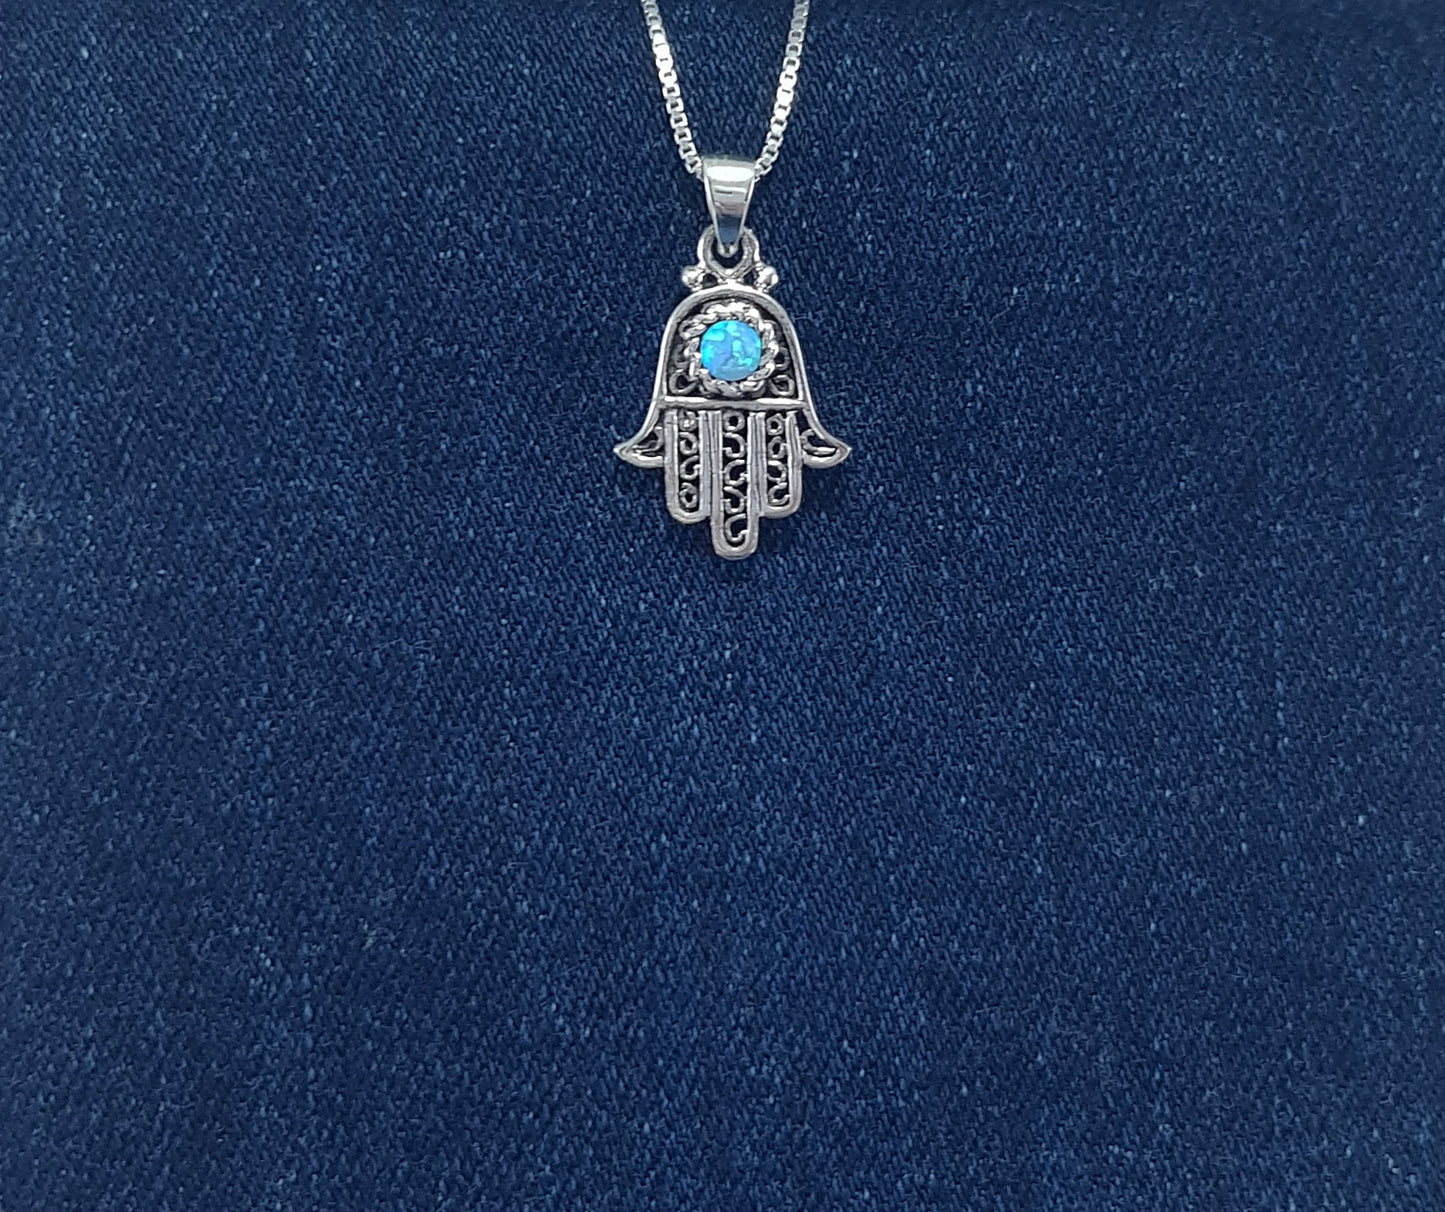 Sterling Silver Hamsa Hand Pendant in a filigree design with crushed opal inlay